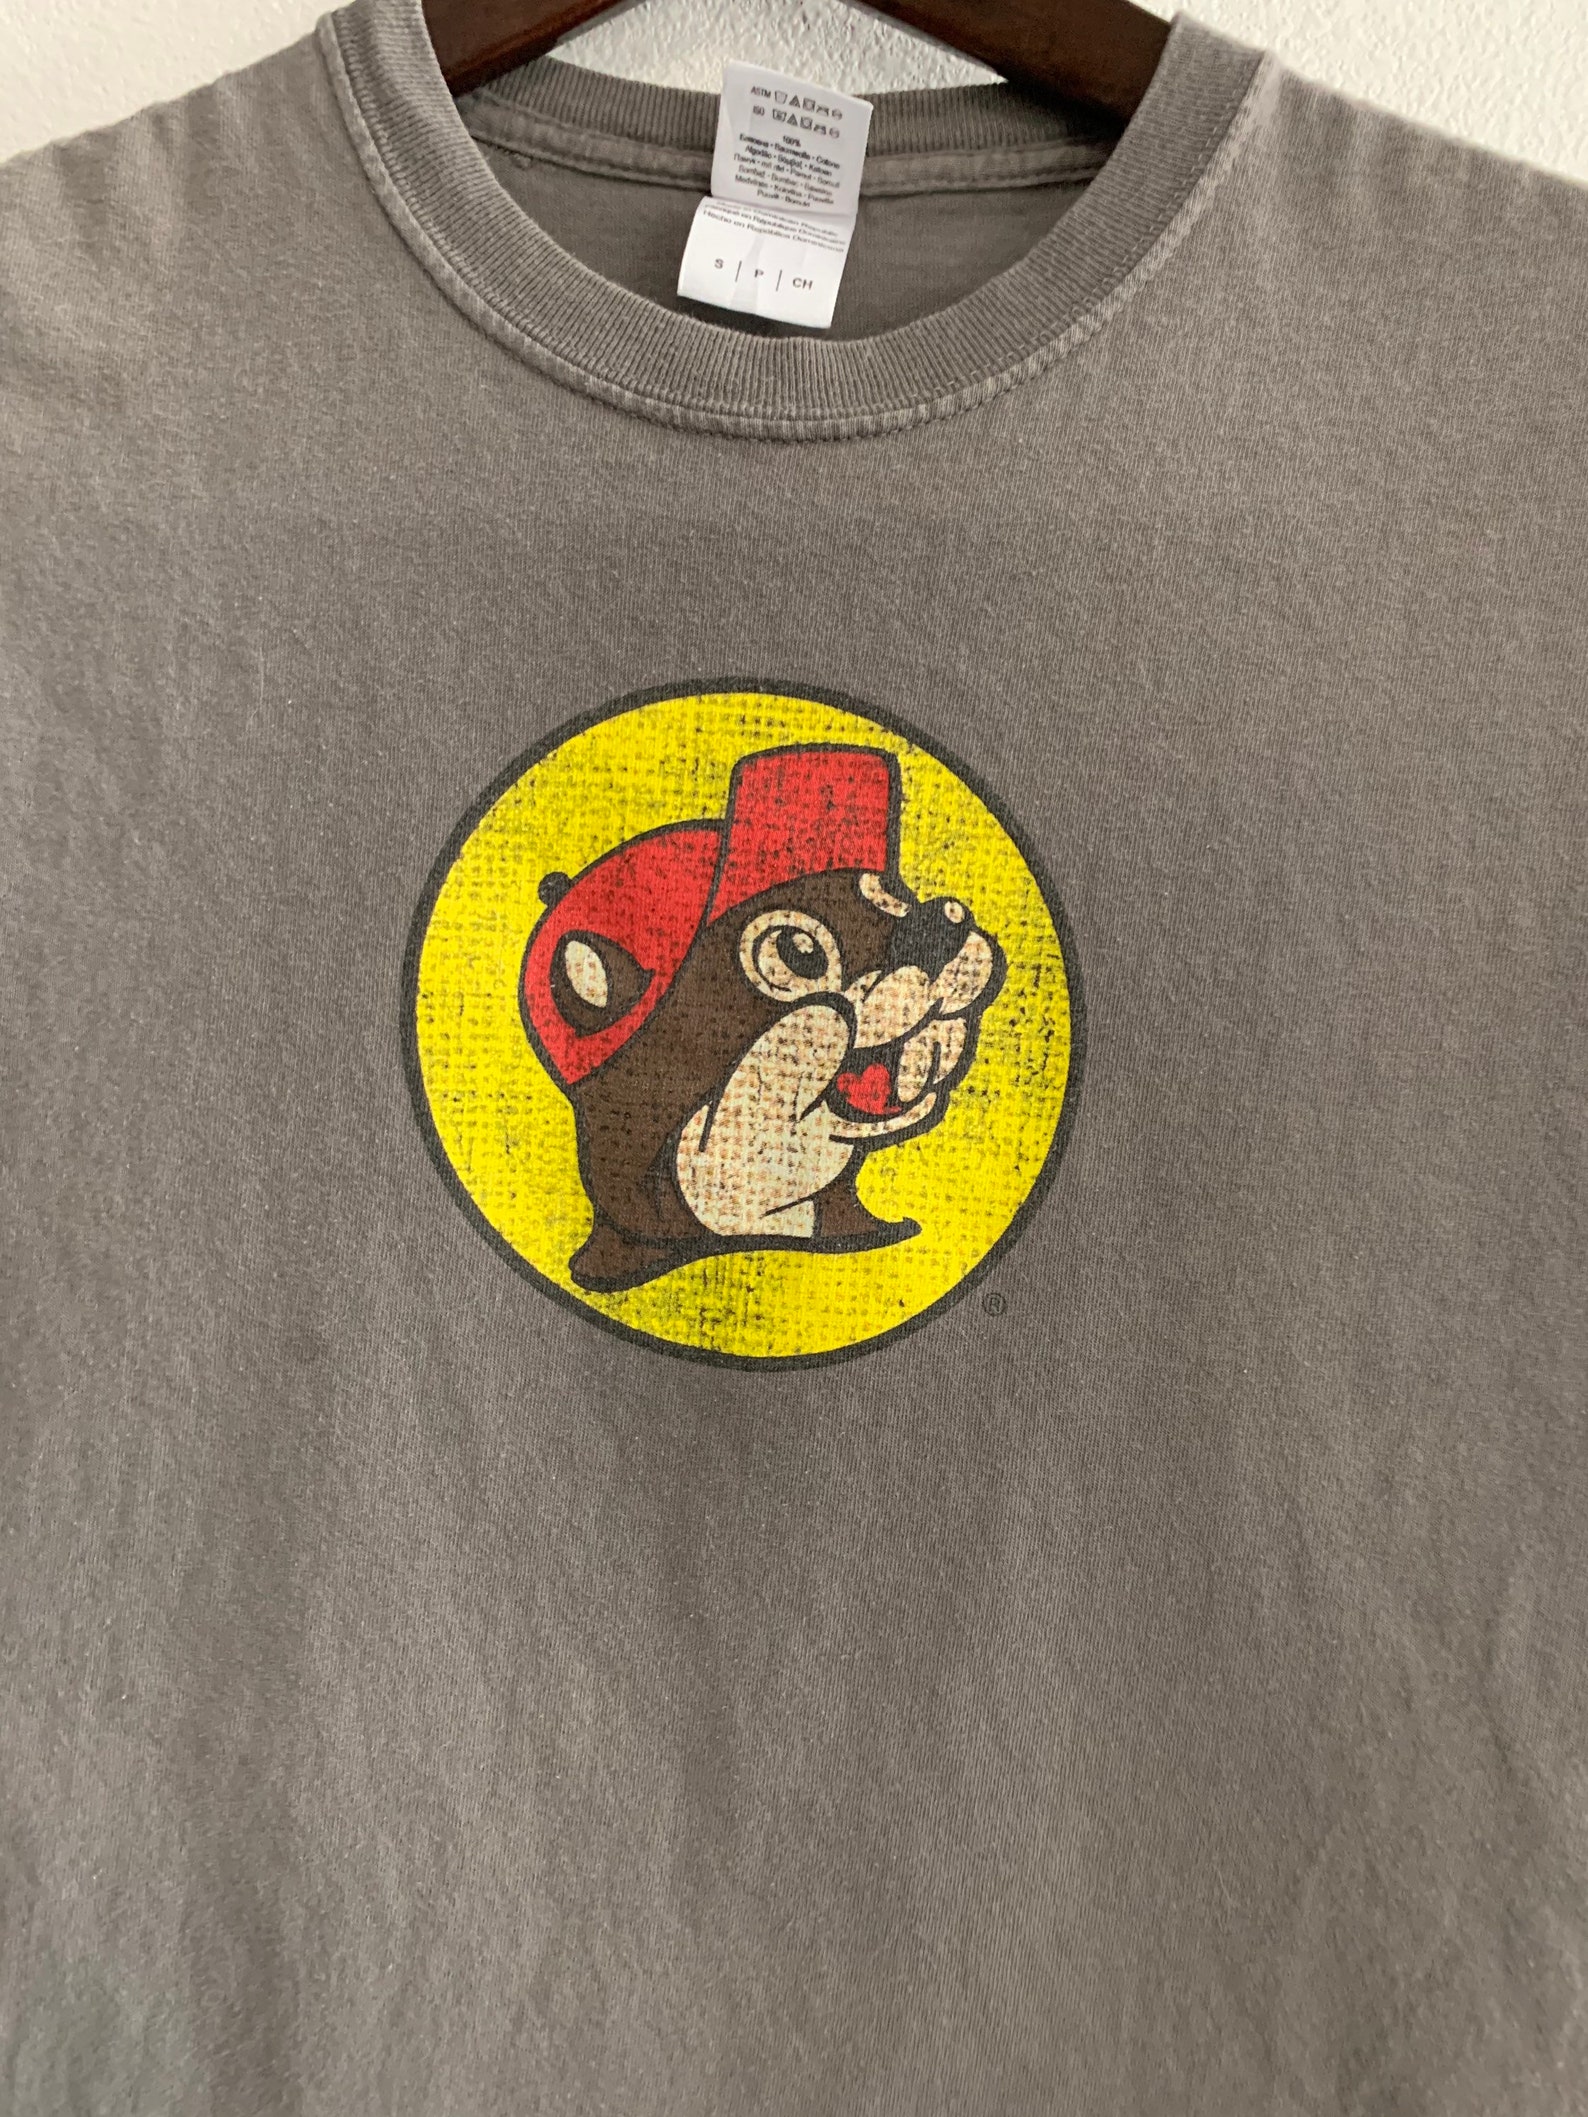 Buc-ees t shirt size S | Etsy